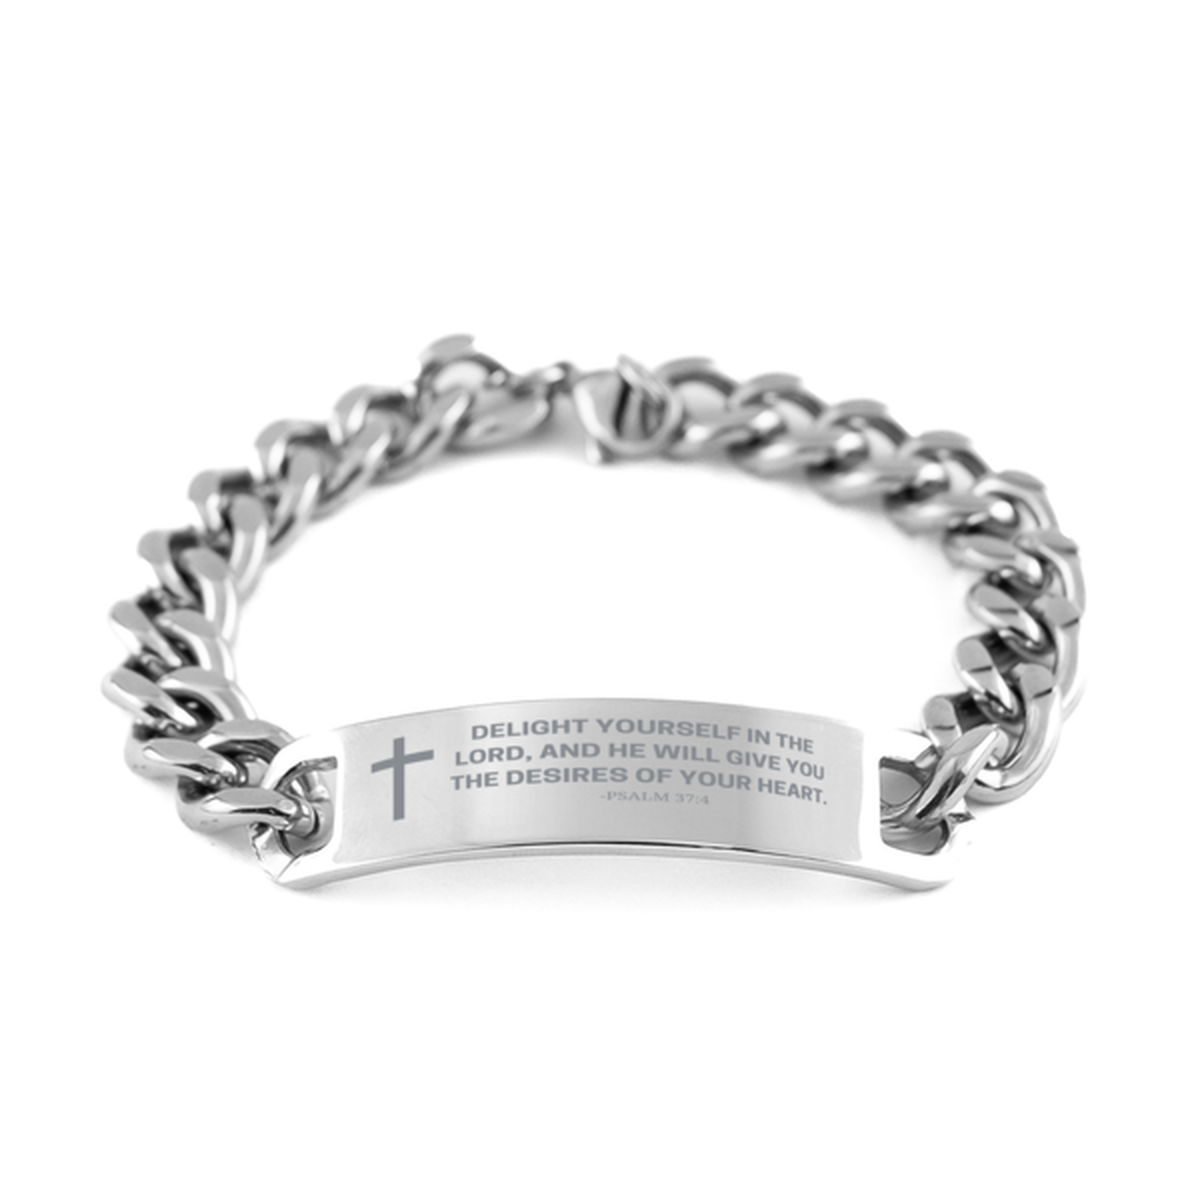 Baptism Gifts For Teenage Boys Girls, Christian Bible Verse Cuban Chain Bracelet, Delight yourself in the Lord, Catholic Confirmation Gifts for Son, Godson, Grandson, Nephew